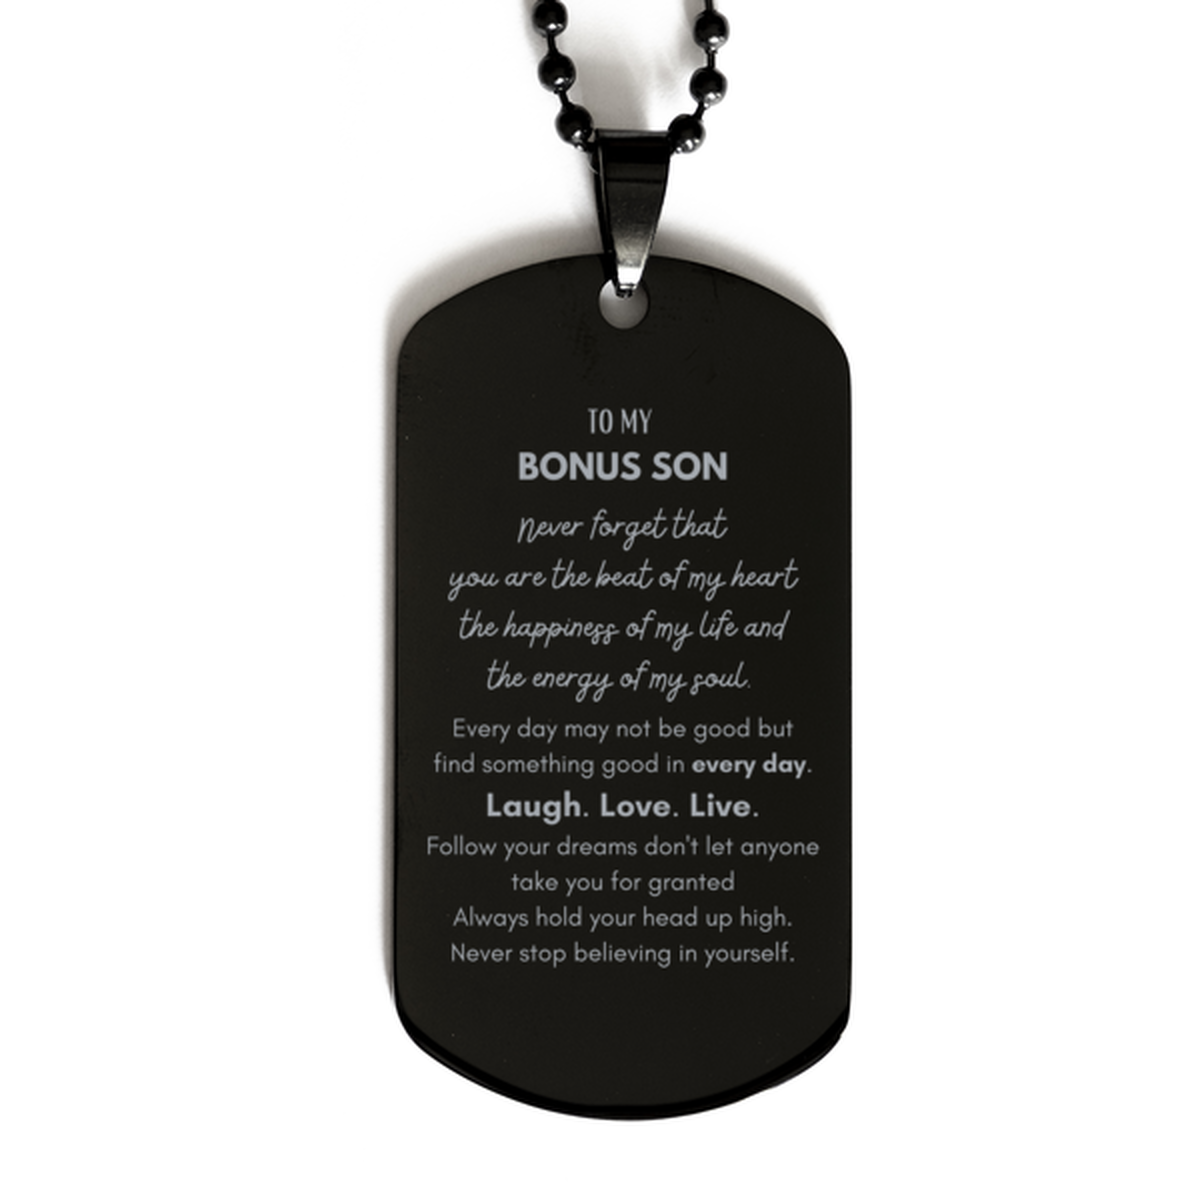 To My Bonus Son Dogtag Gifts, Christmas Bonus Son Black Dog Tag Present, Birthday Unique Motivational For Bonus Son, To My Bonus Son Never forget that you are the beat of my heart the happiness of my life and the energy of my soul